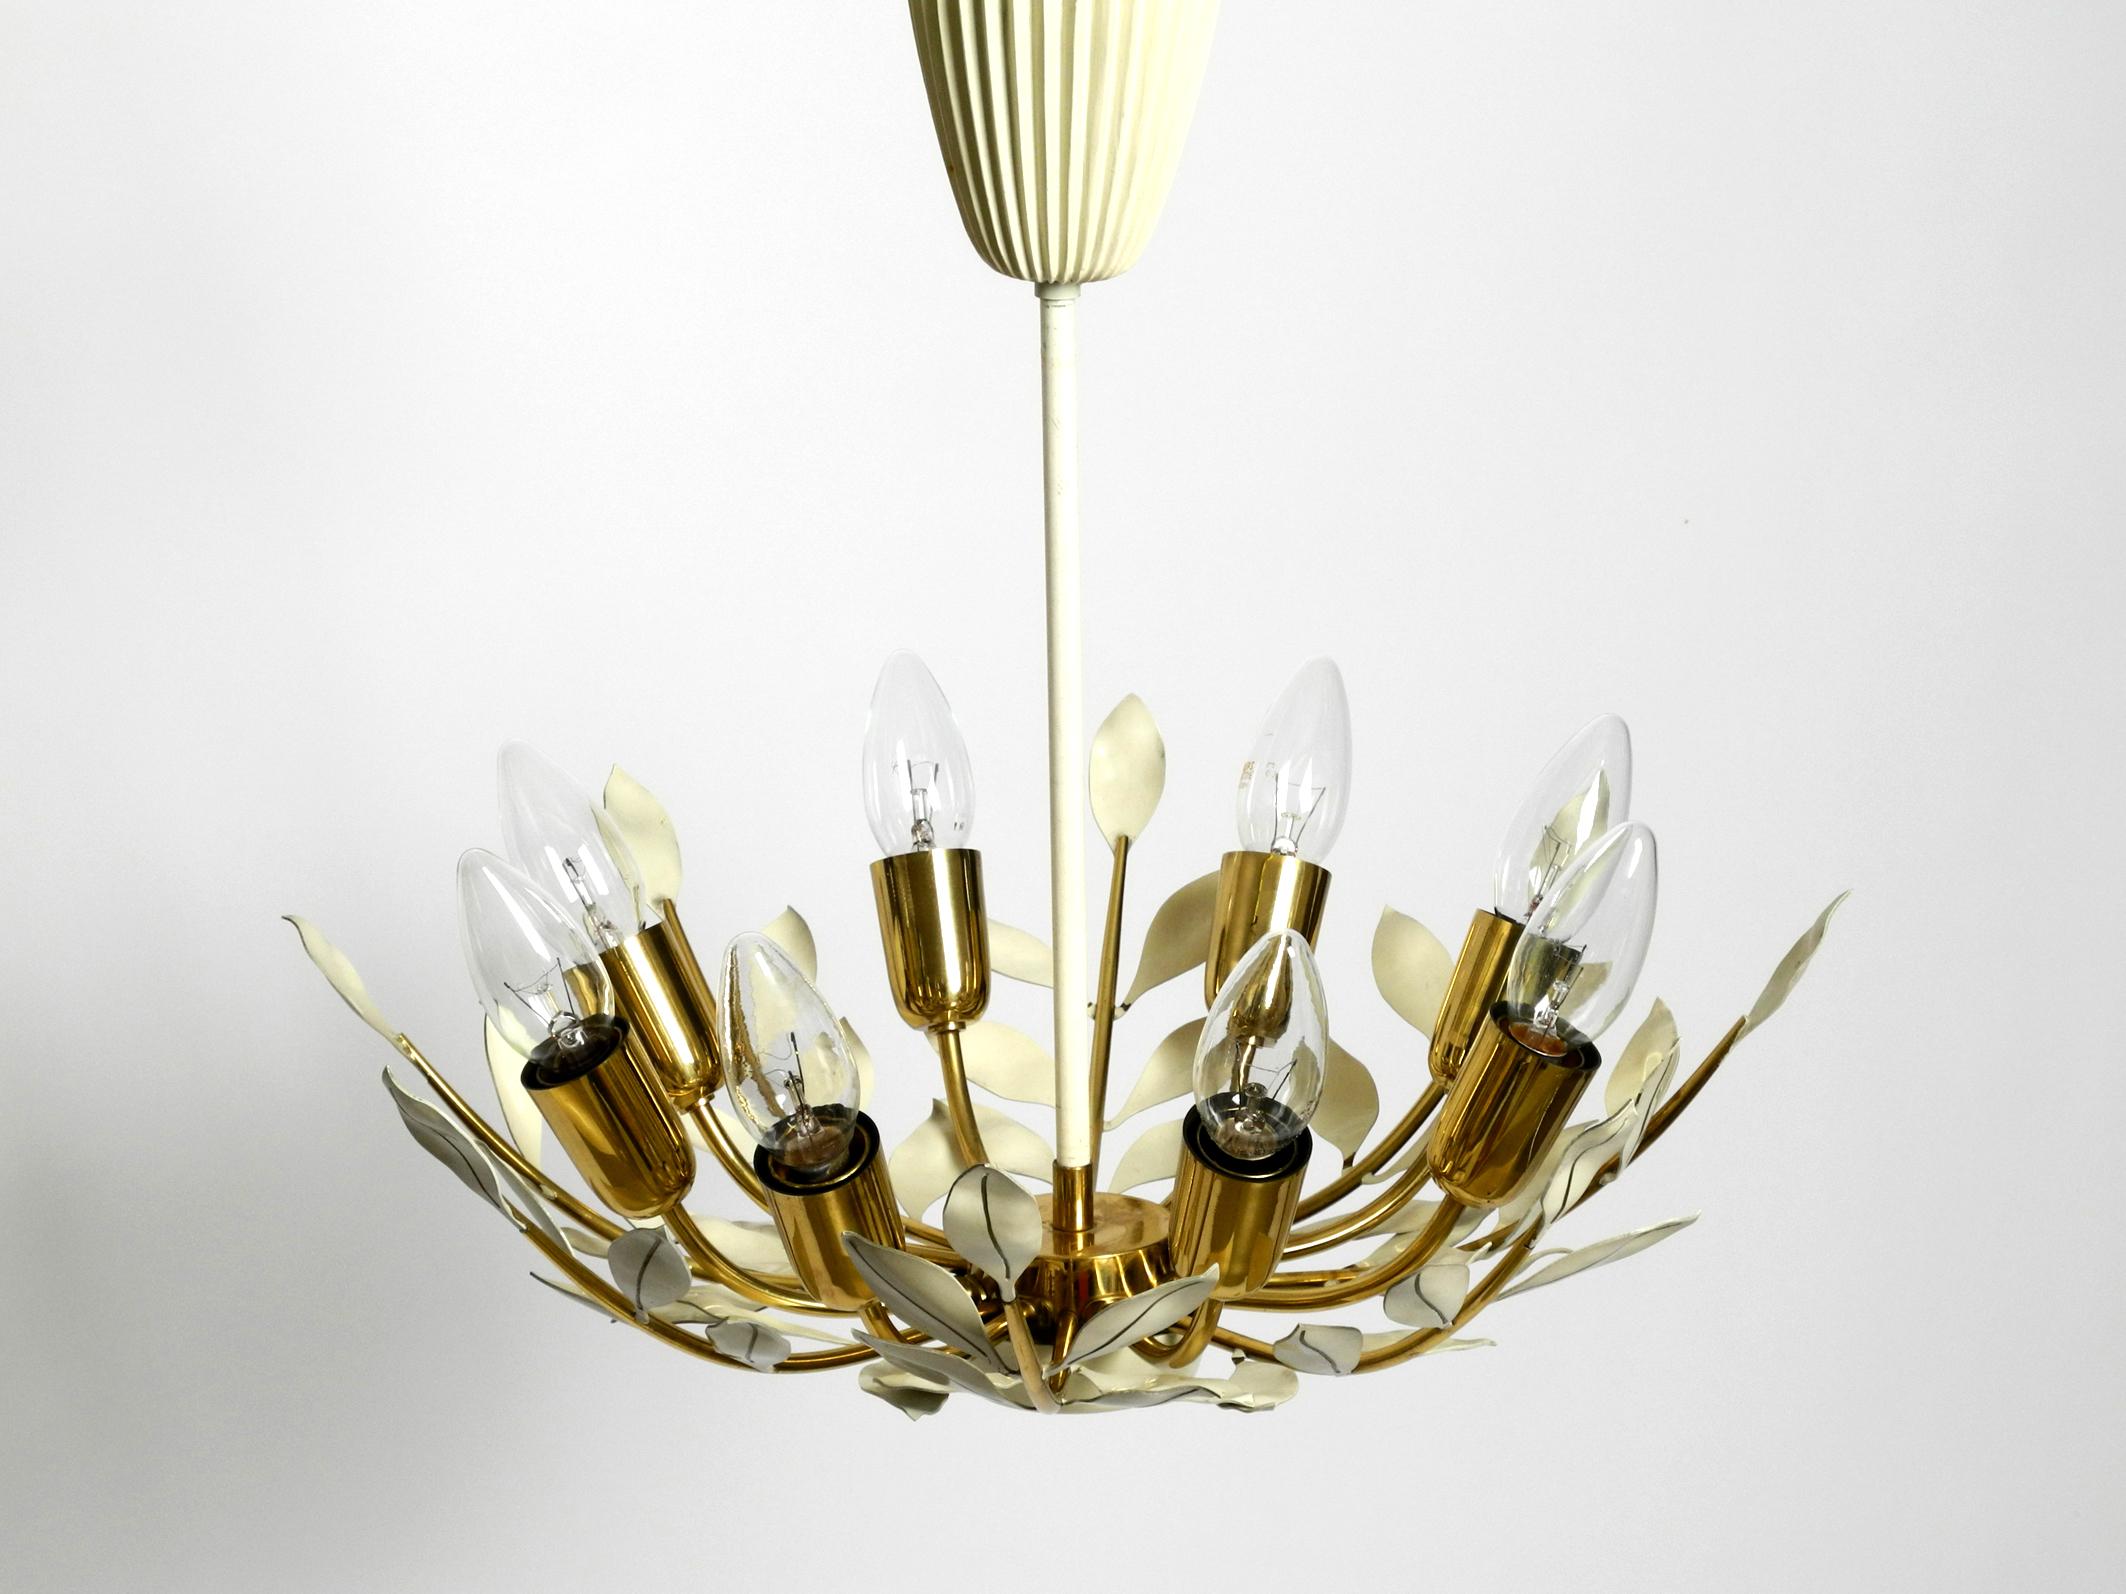 Small rare Mid Century brass Sputnik ceiling lamp with 8 arms.
Manufacturer is Vereinigte Werkstätten. Made in Germany.
Beautiful floral design with white painted leaves. Very rare in this small version. The entire lamp is made of brass including